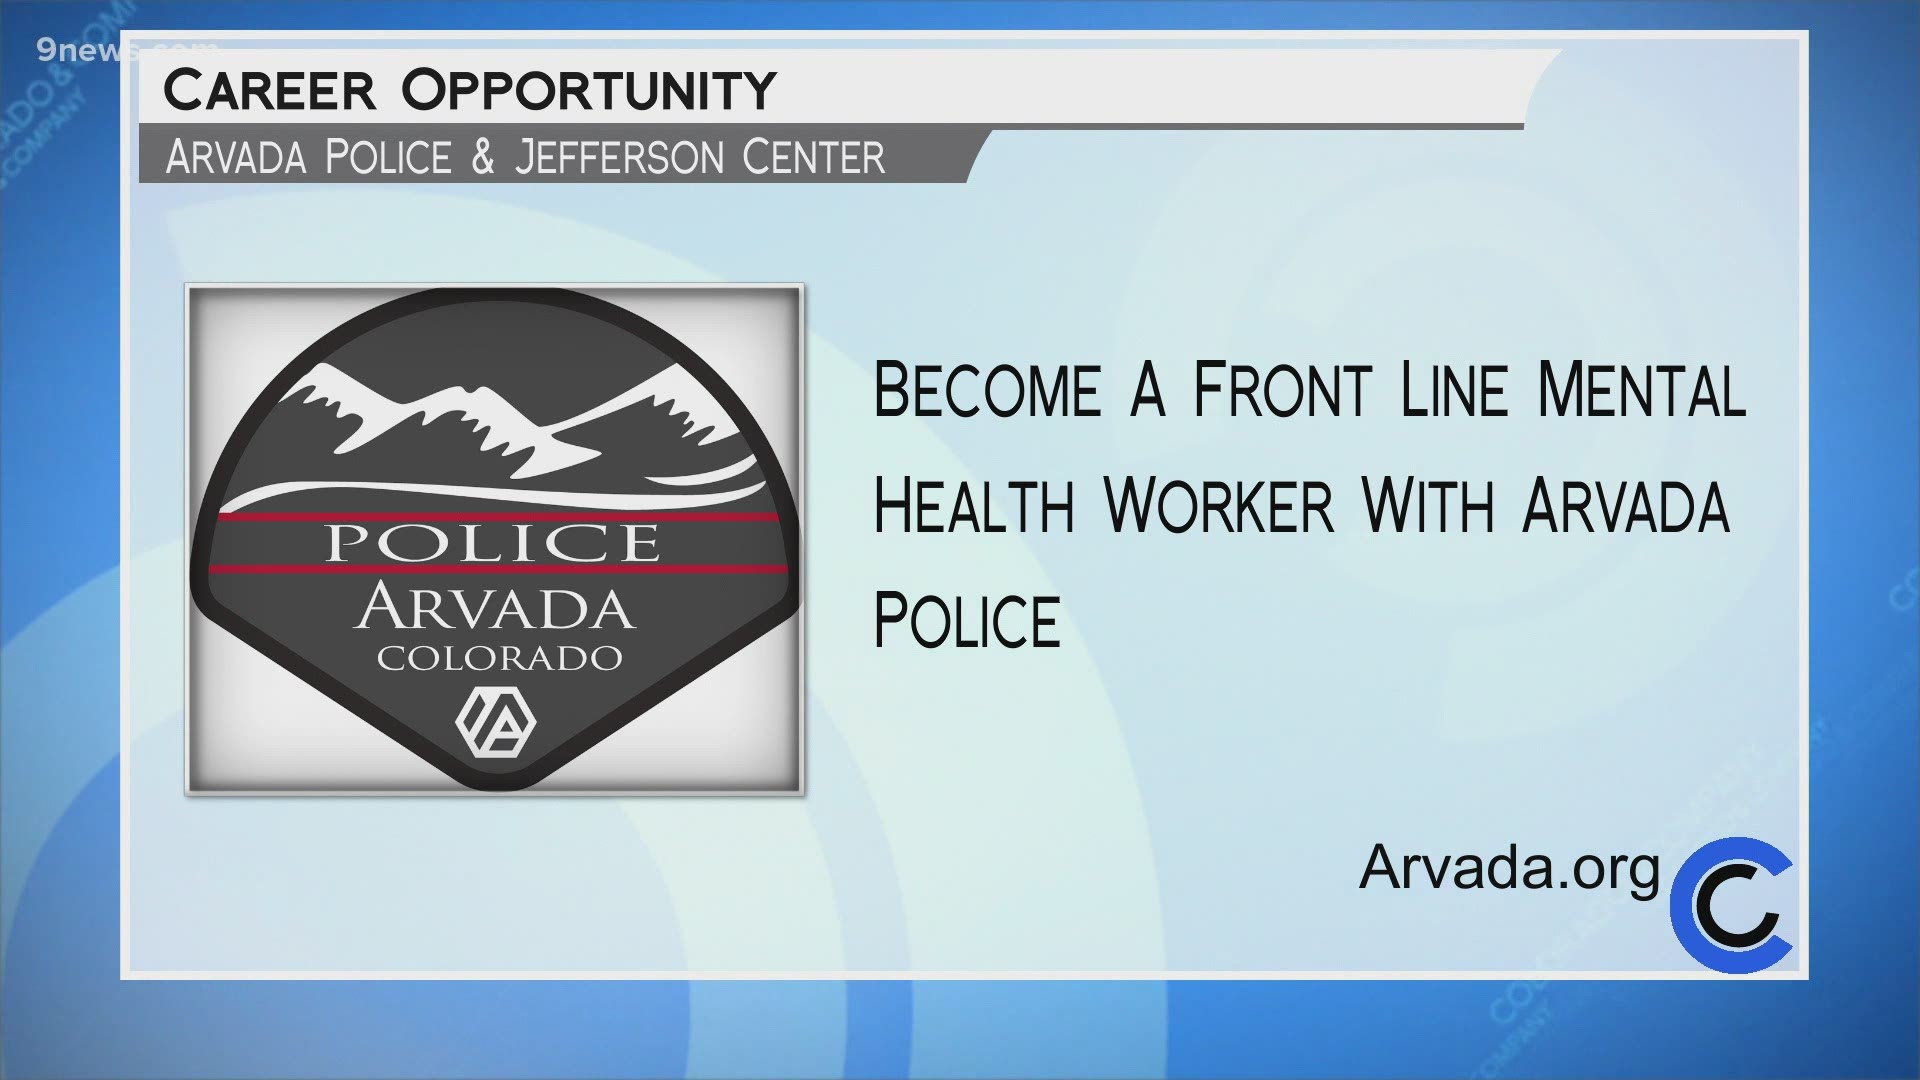 If you want to serve alongside Arvada Police as a mental health professional, apply online at Arvada.org.